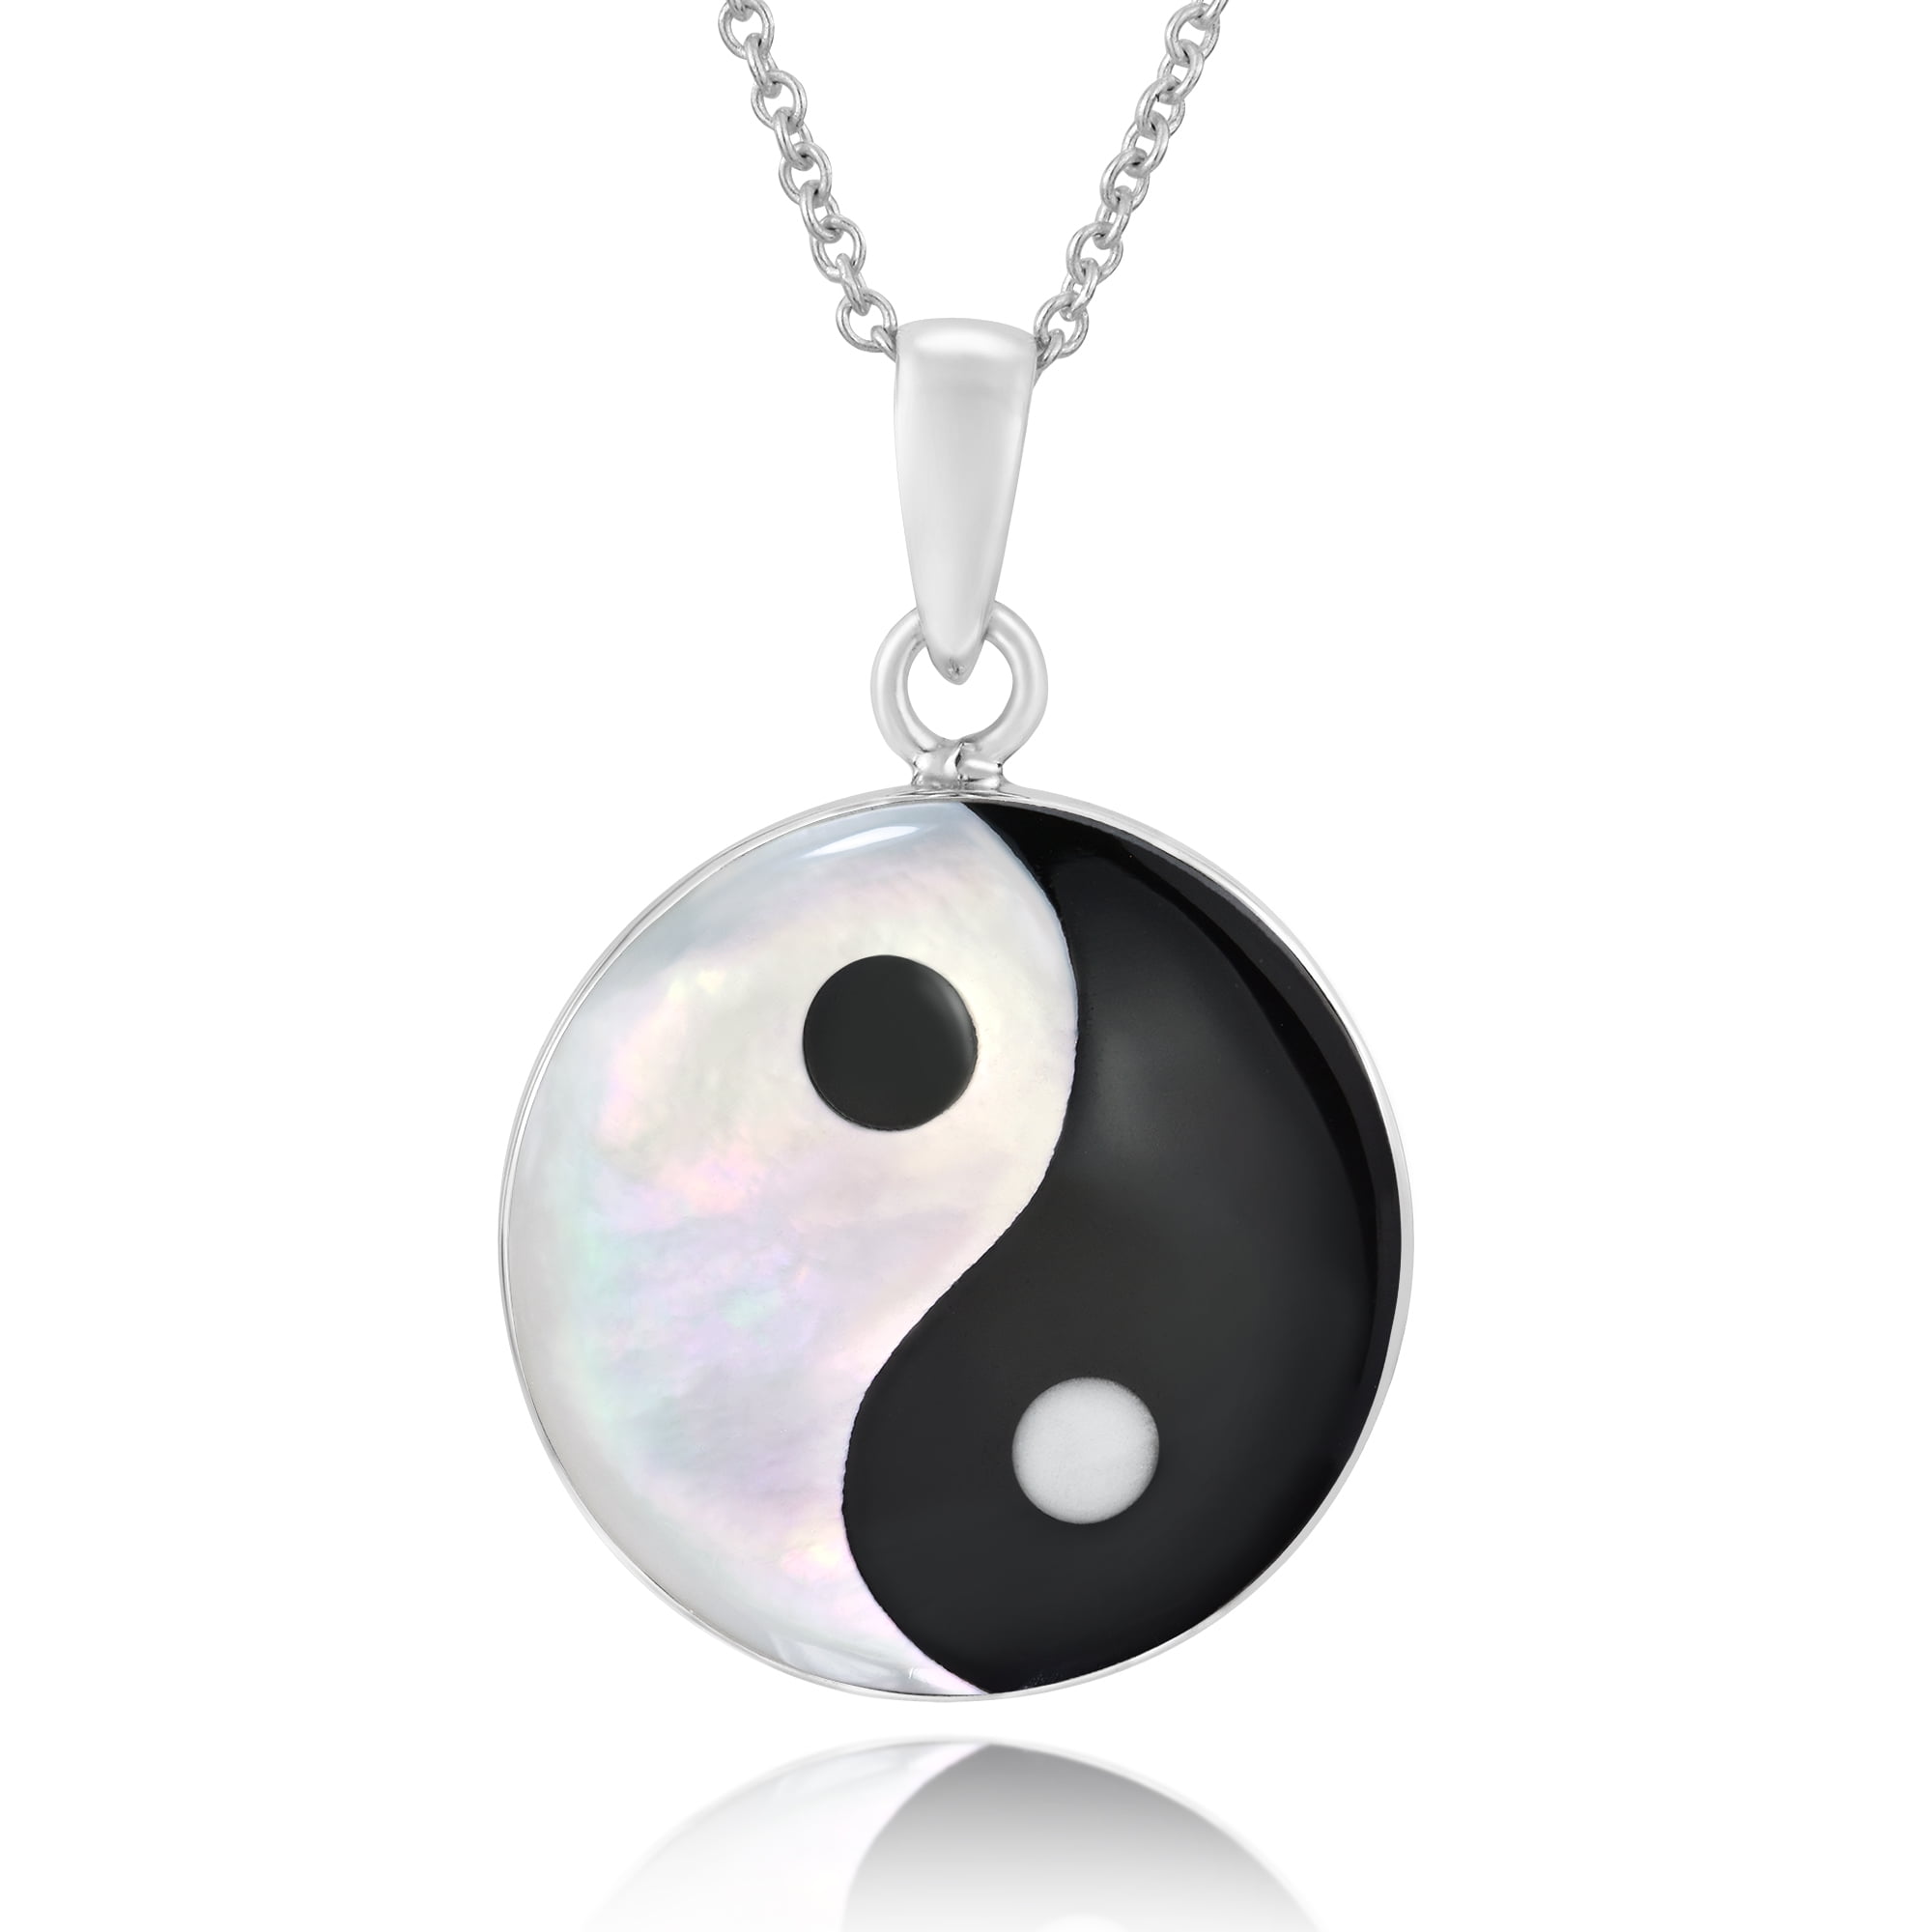 Never Give Up Reversible Amulet Yin Yang Balance Powers Arrowhead Sky Blue Simulated Cats Eye Necklace